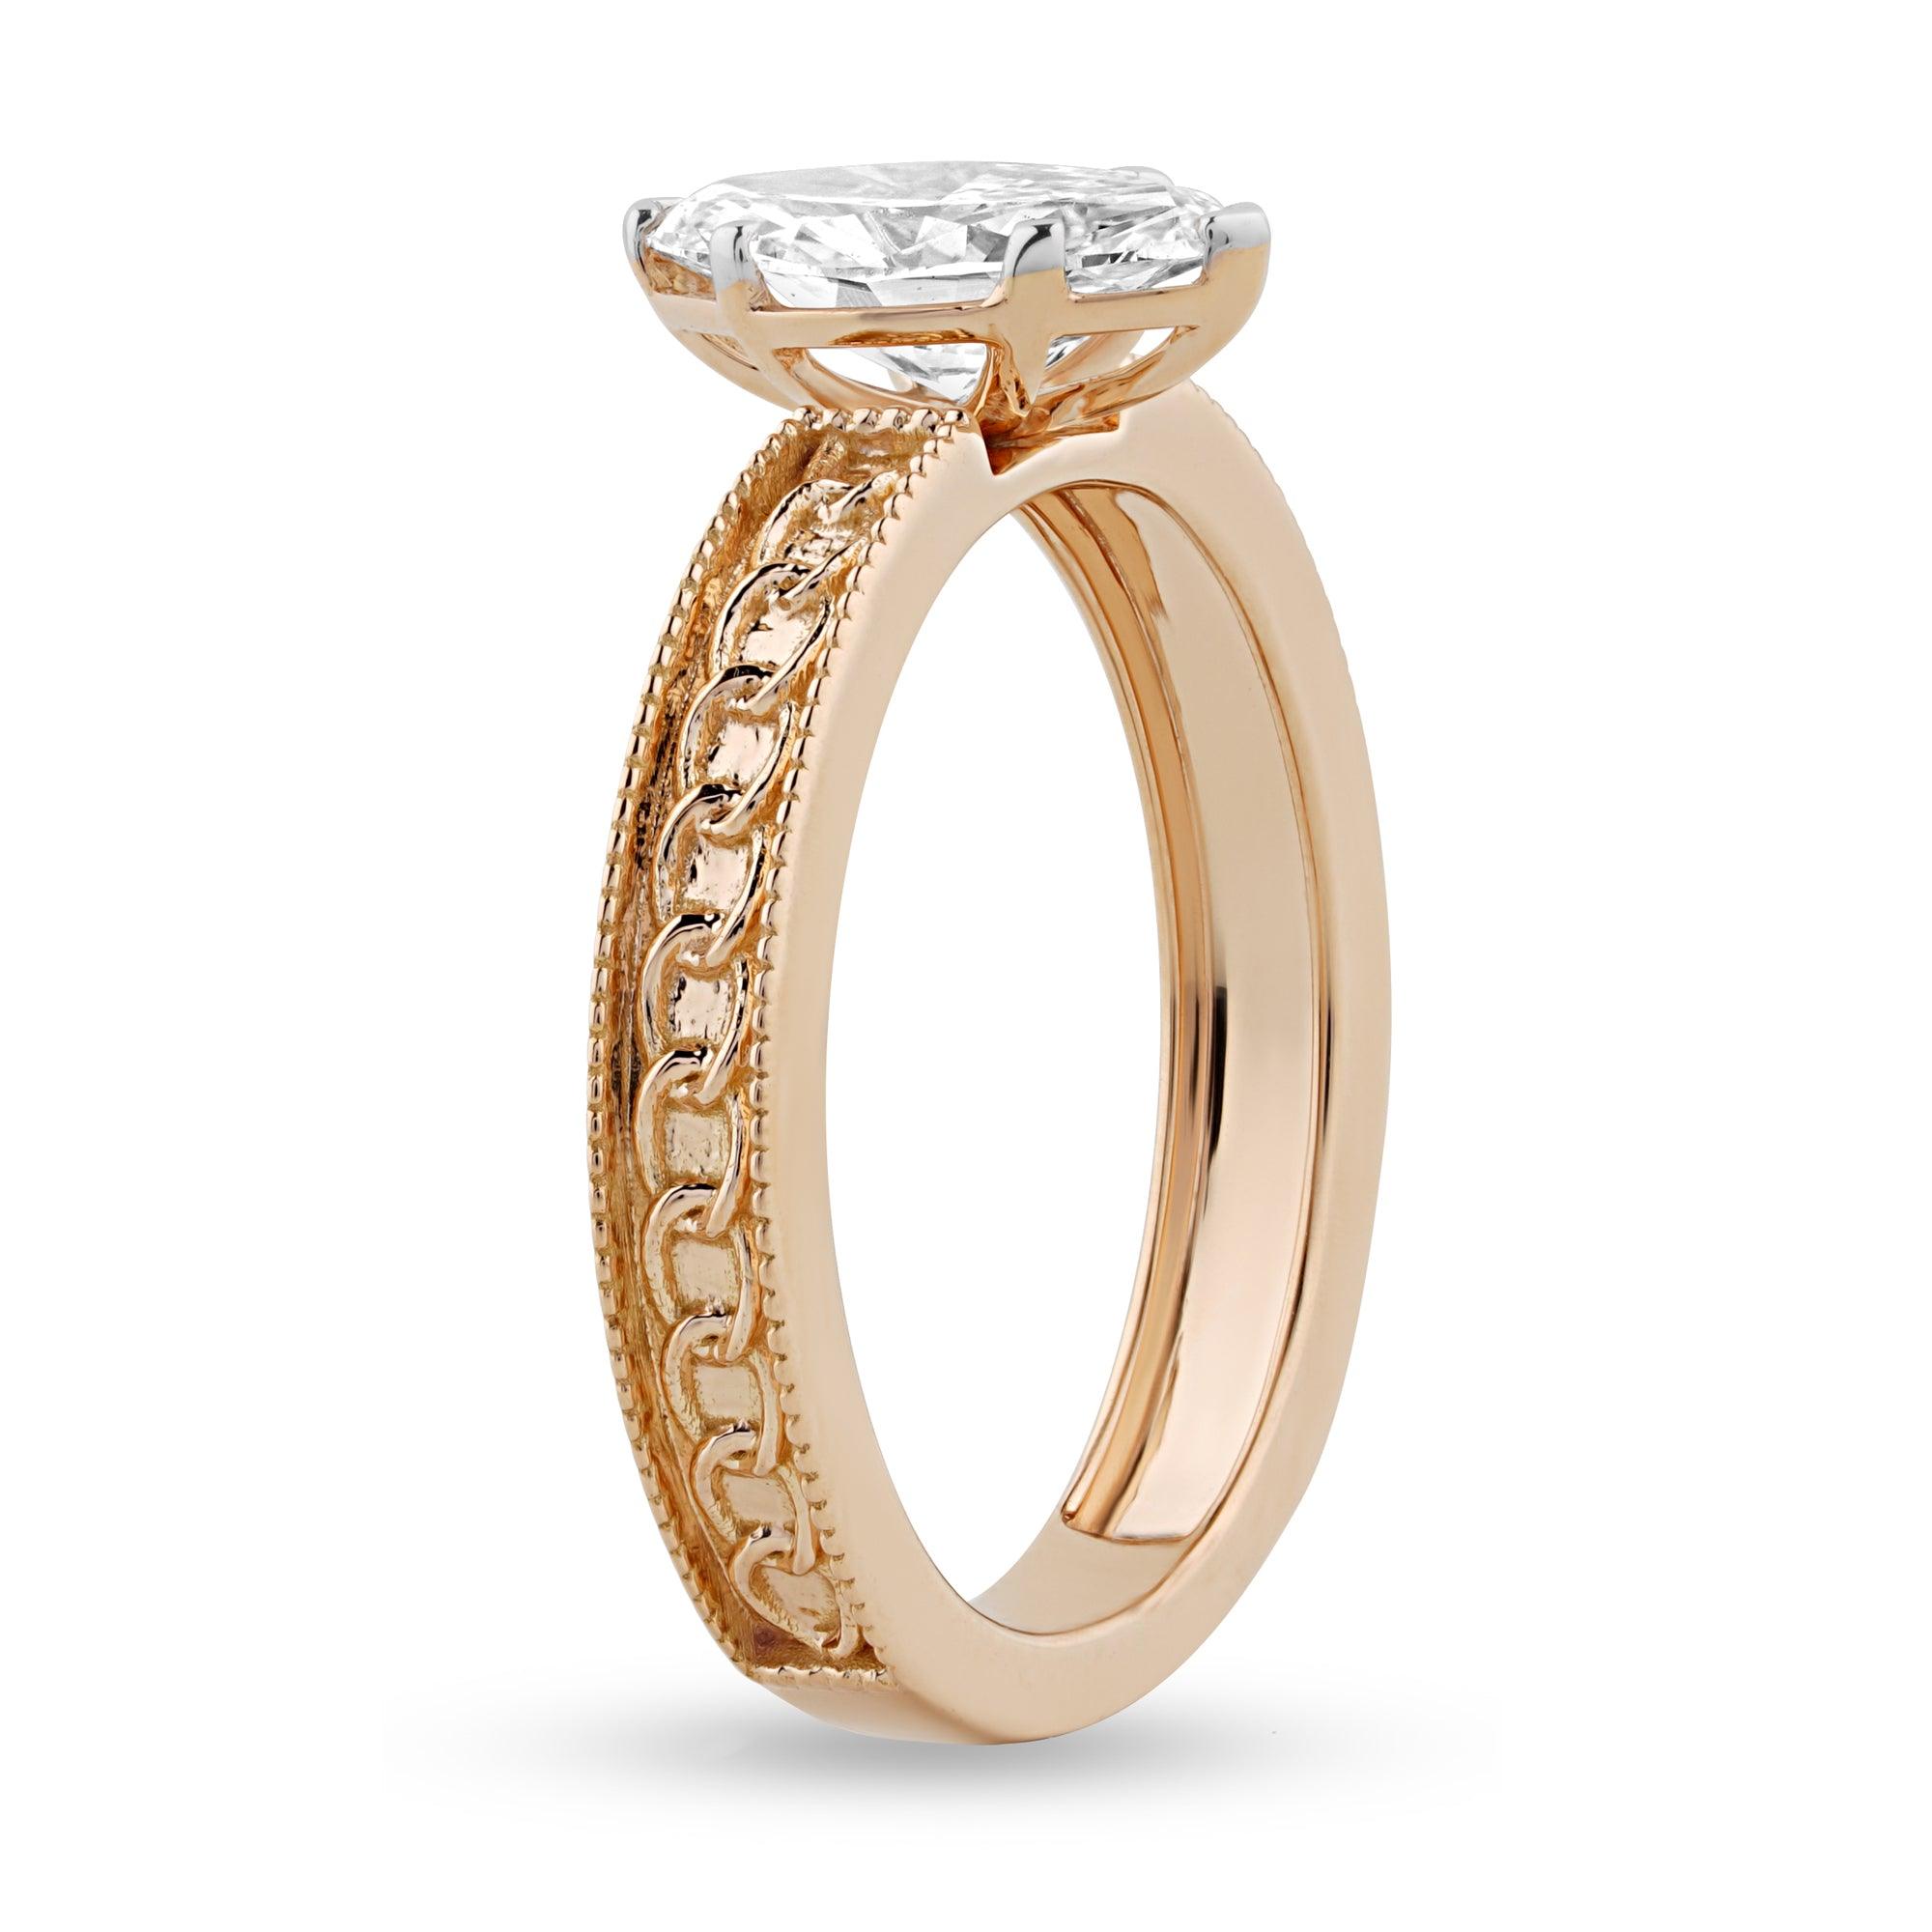 Entwined Solitaire Ring with 1.02ct Marquise Lab Diamond - Harmony Bound